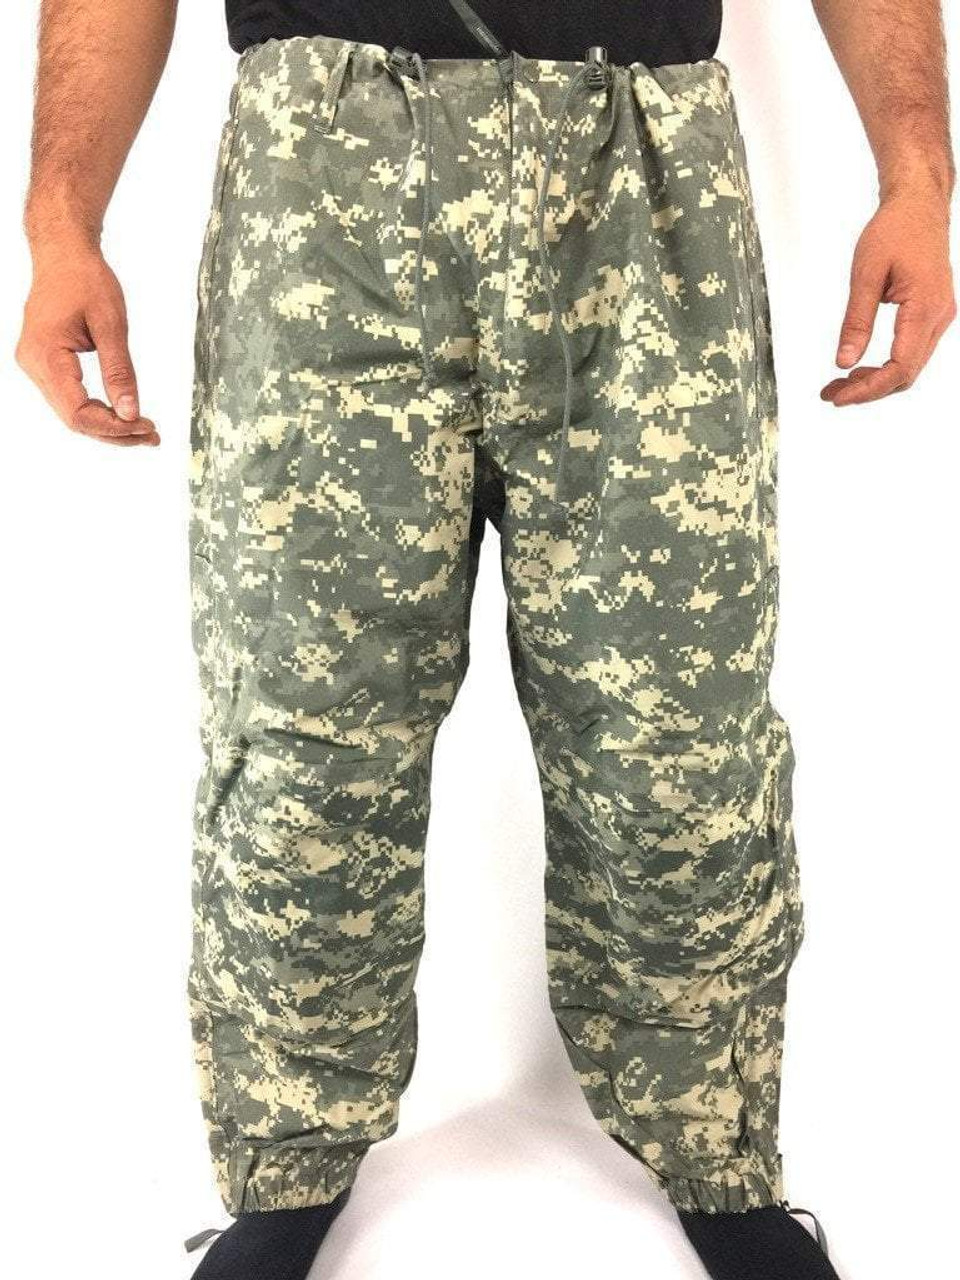 US Air Force Extreme Cold Weather Trousers Type F-1B Size 28 1982 w/ Defect  6-P | eBay